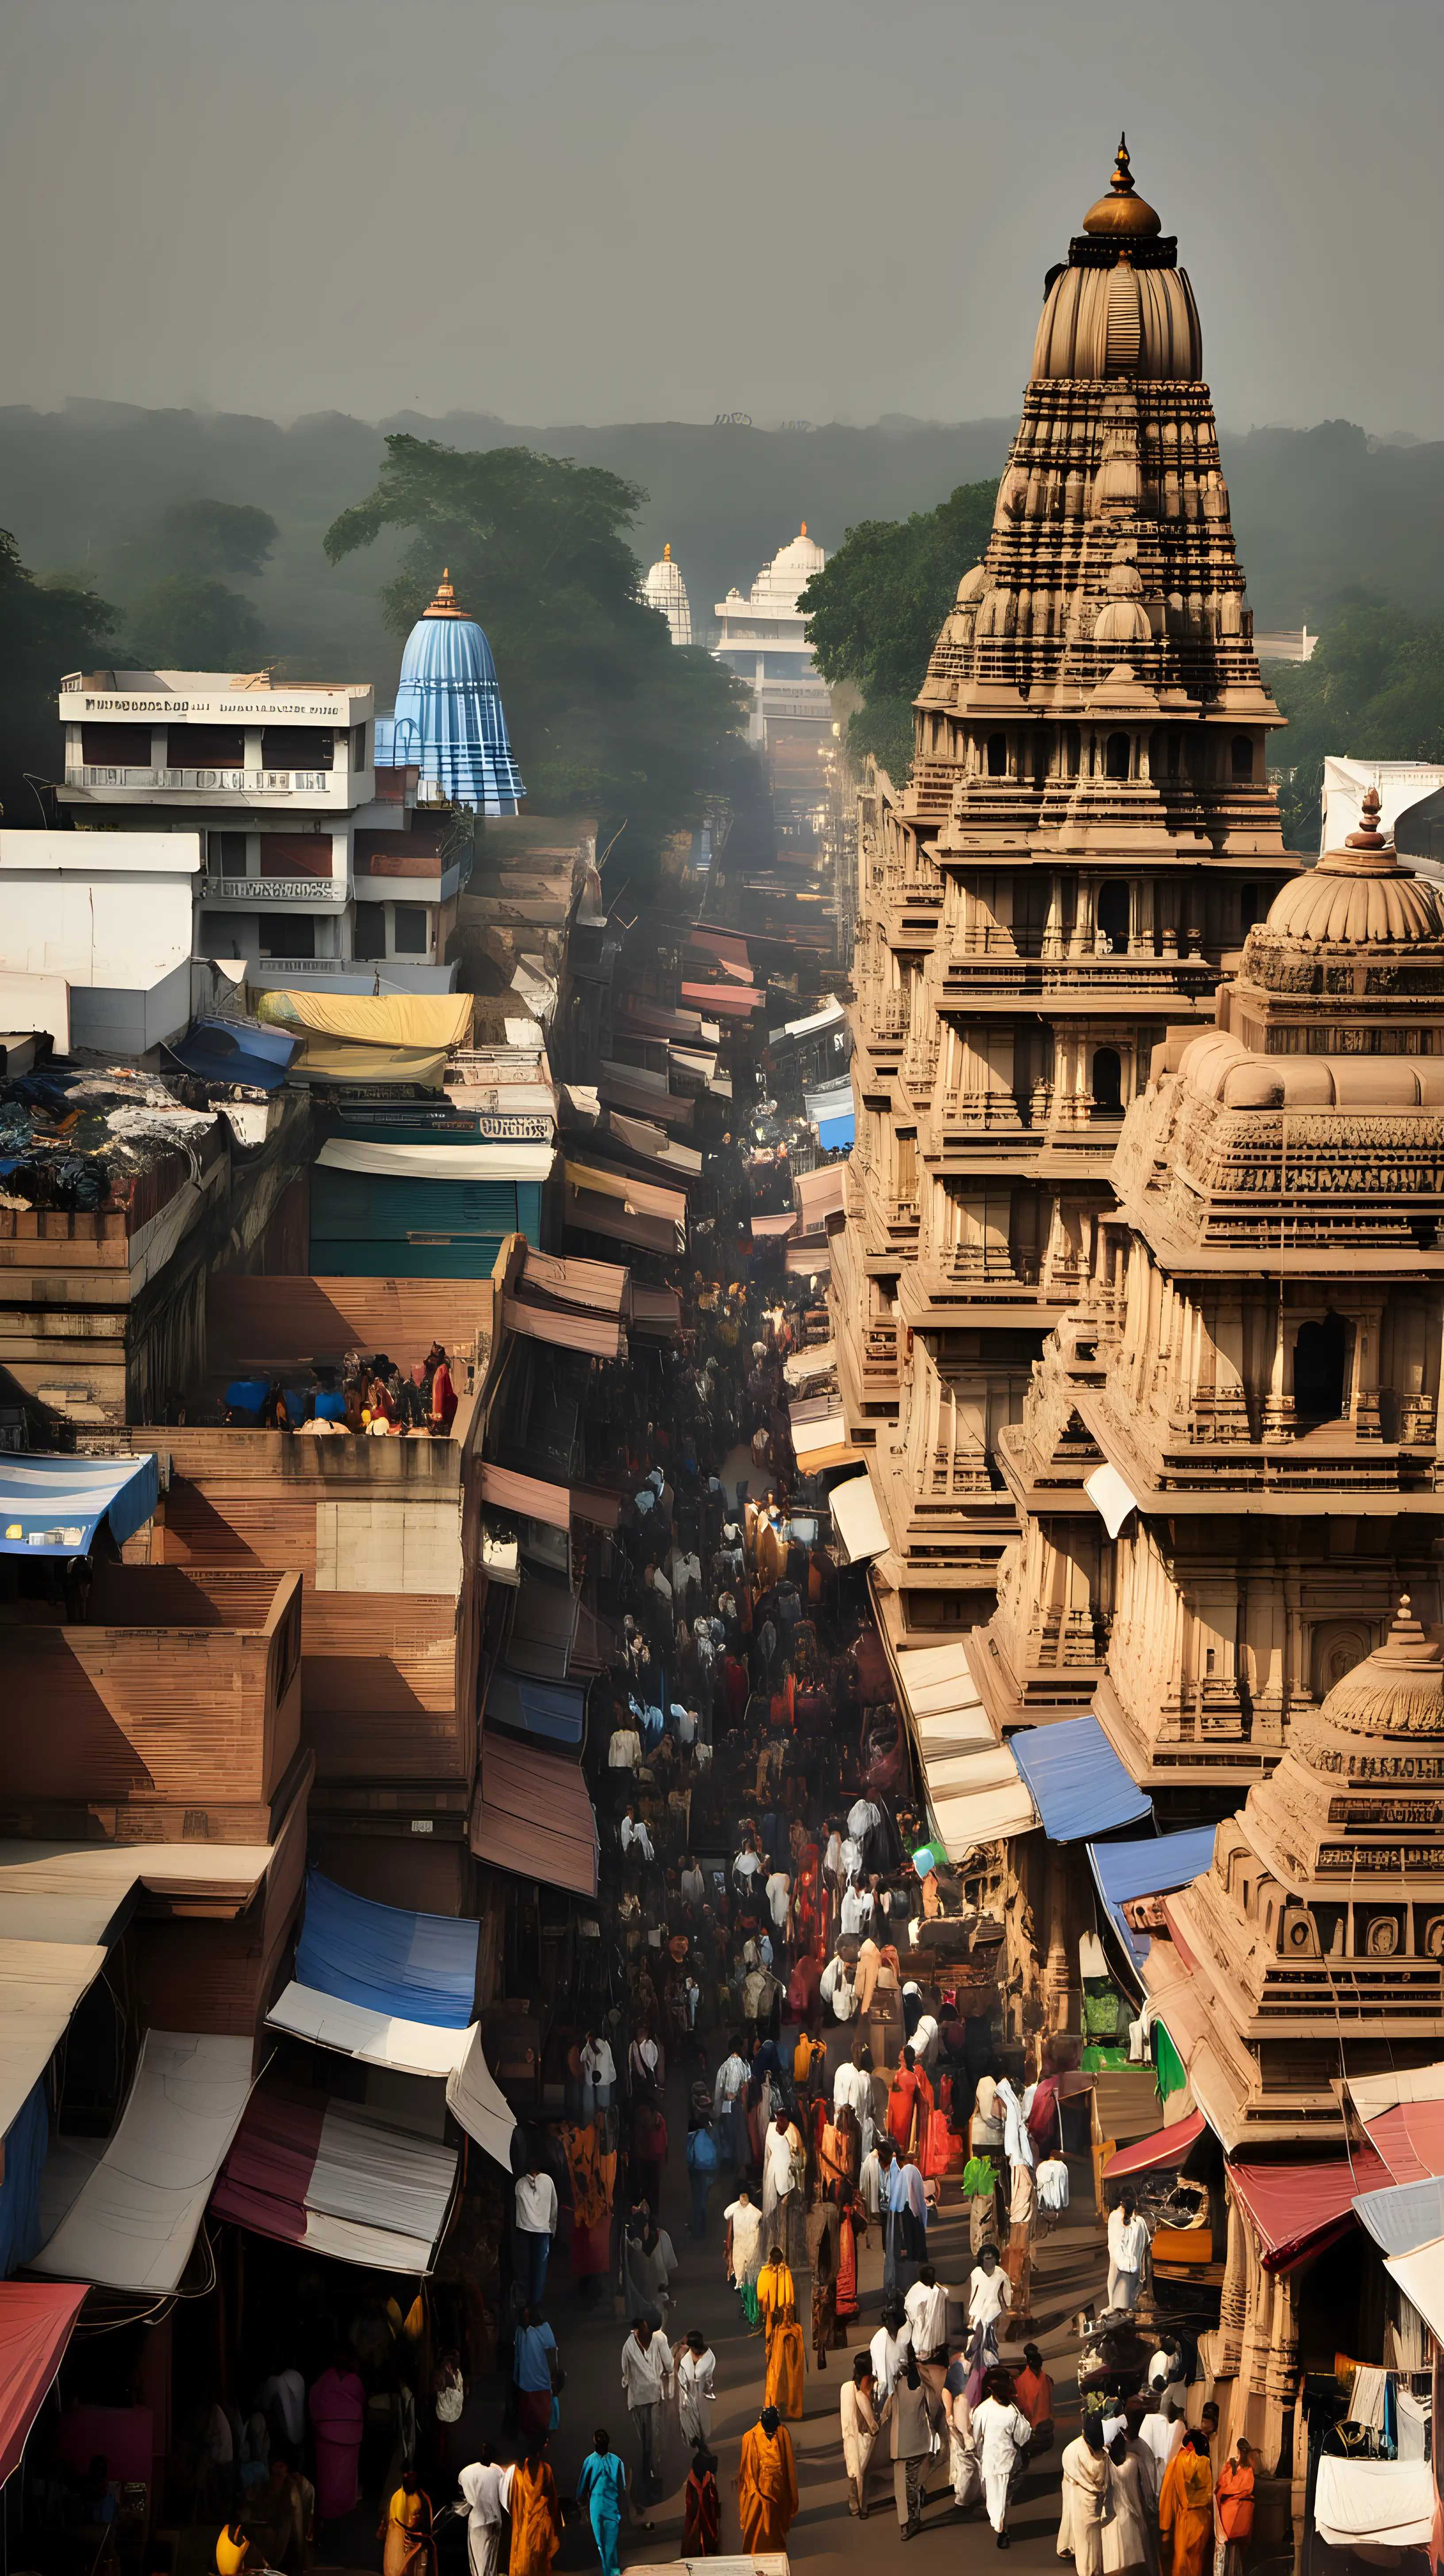 An ancient Indian city with temples and busy markets